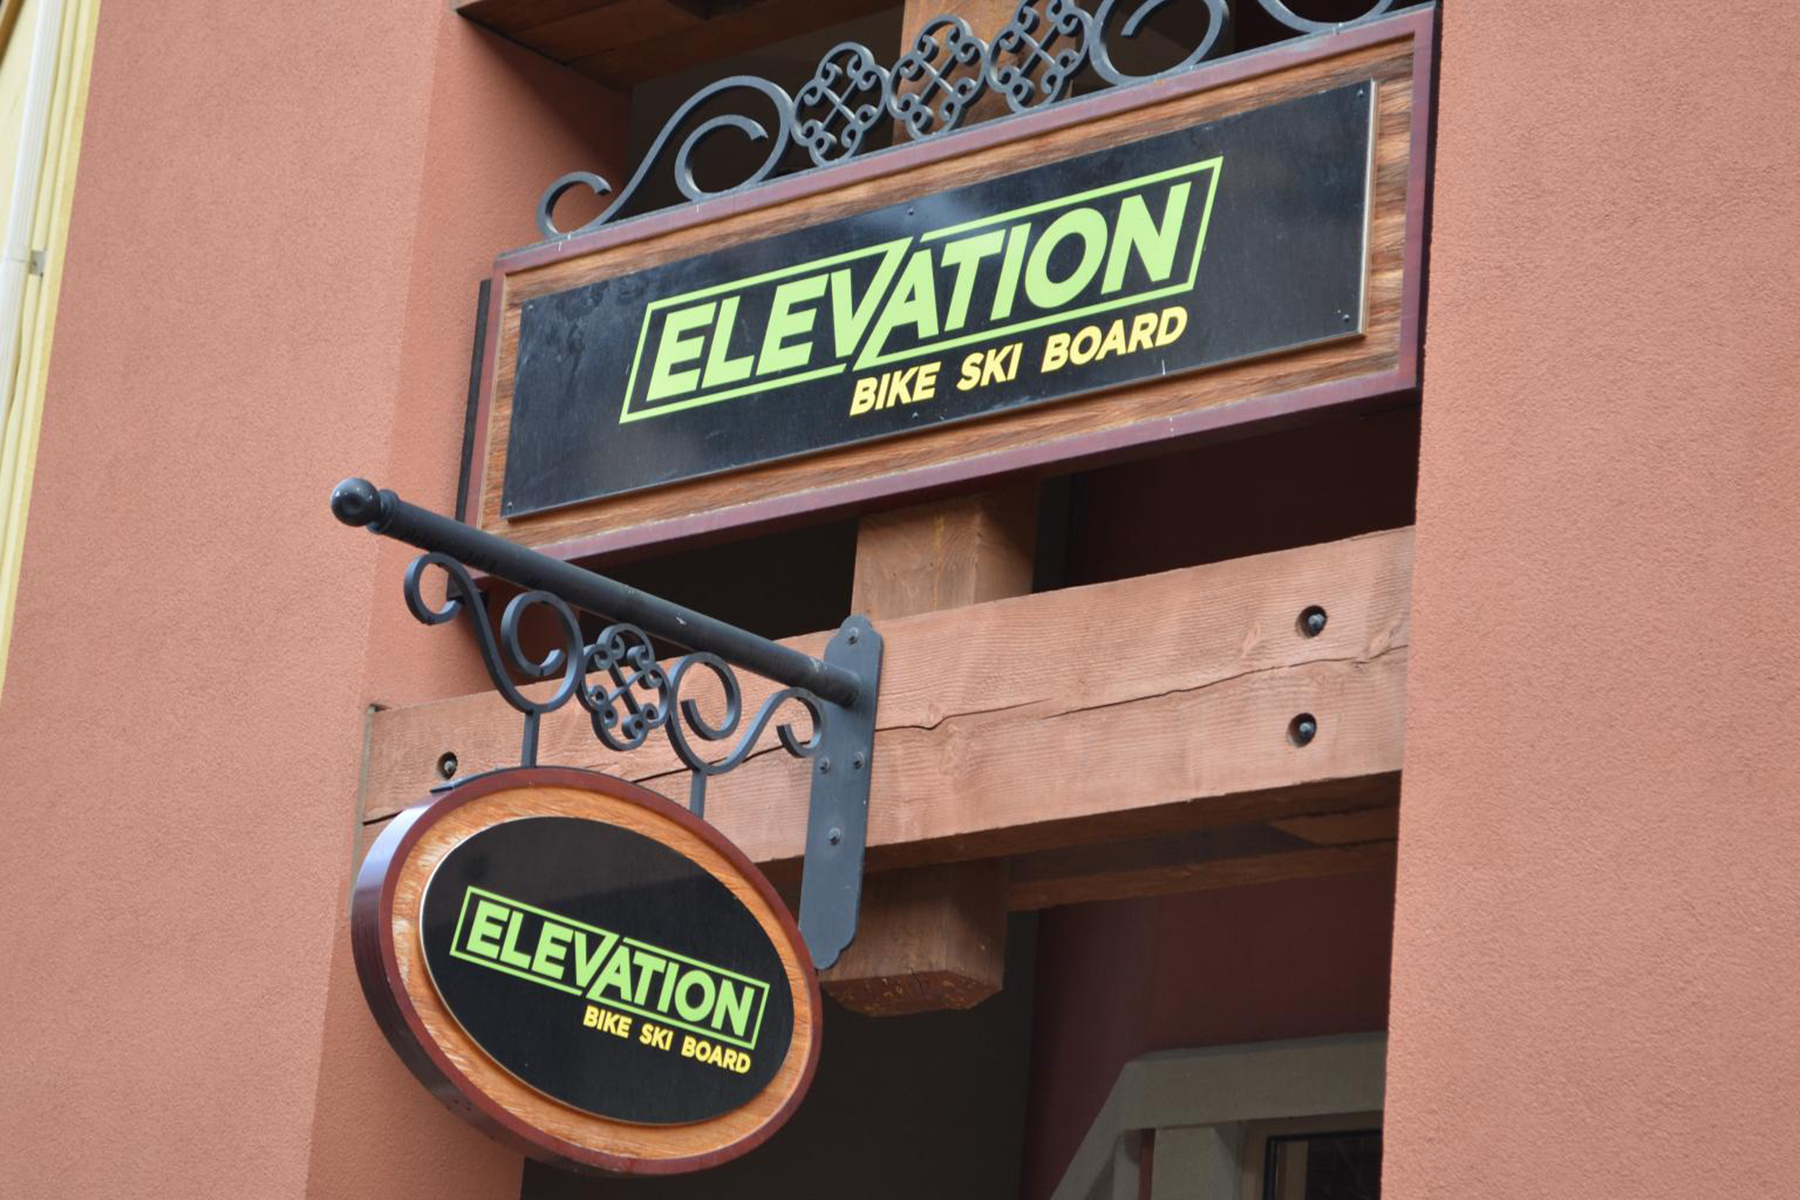 Elevation store sign